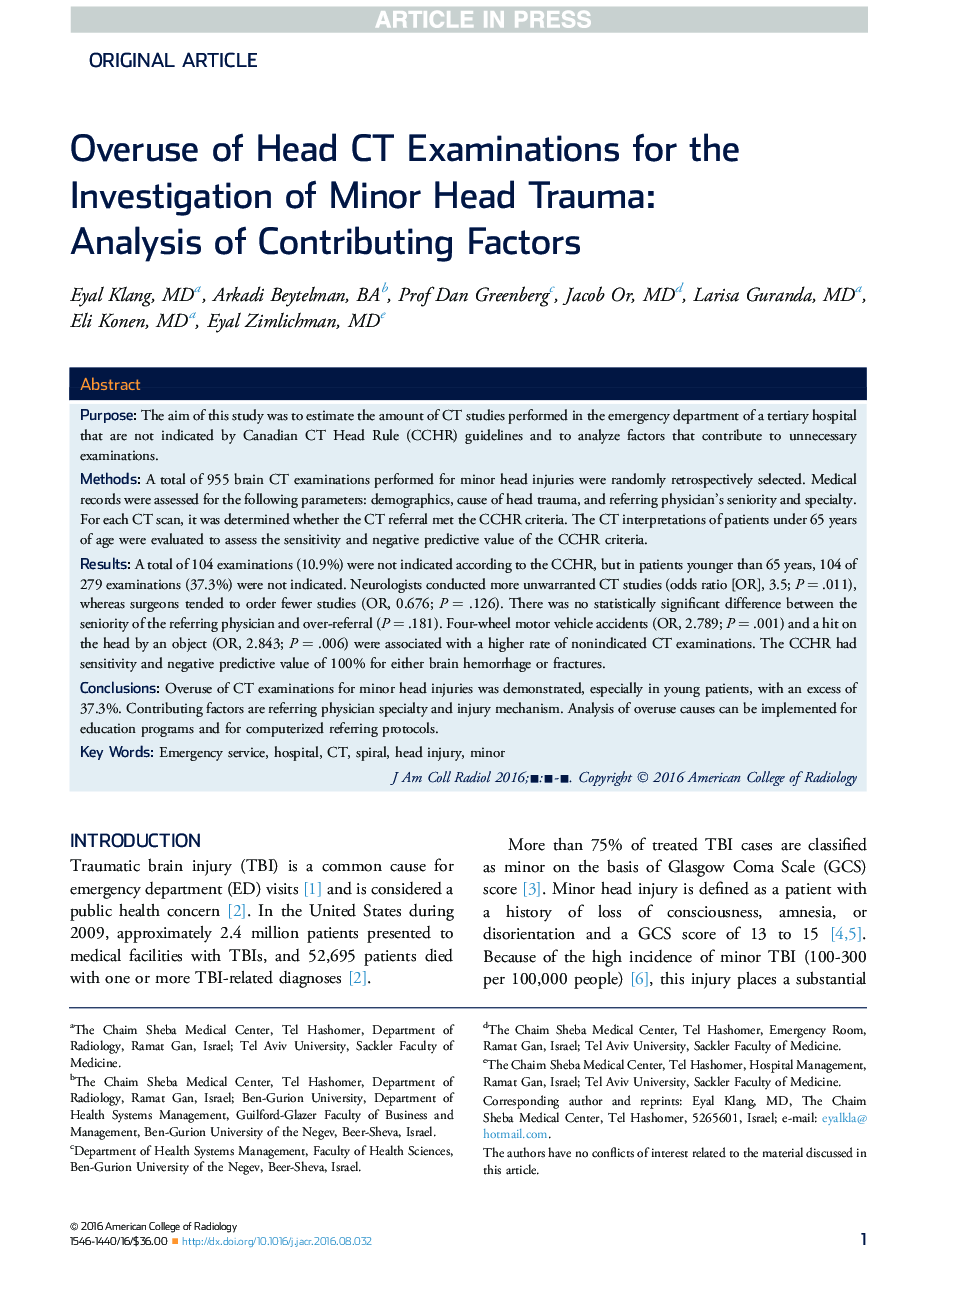 Overuse of Head CT Examinations for the Investigation of Minor Head Trauma: Analysis of Contributing Factors